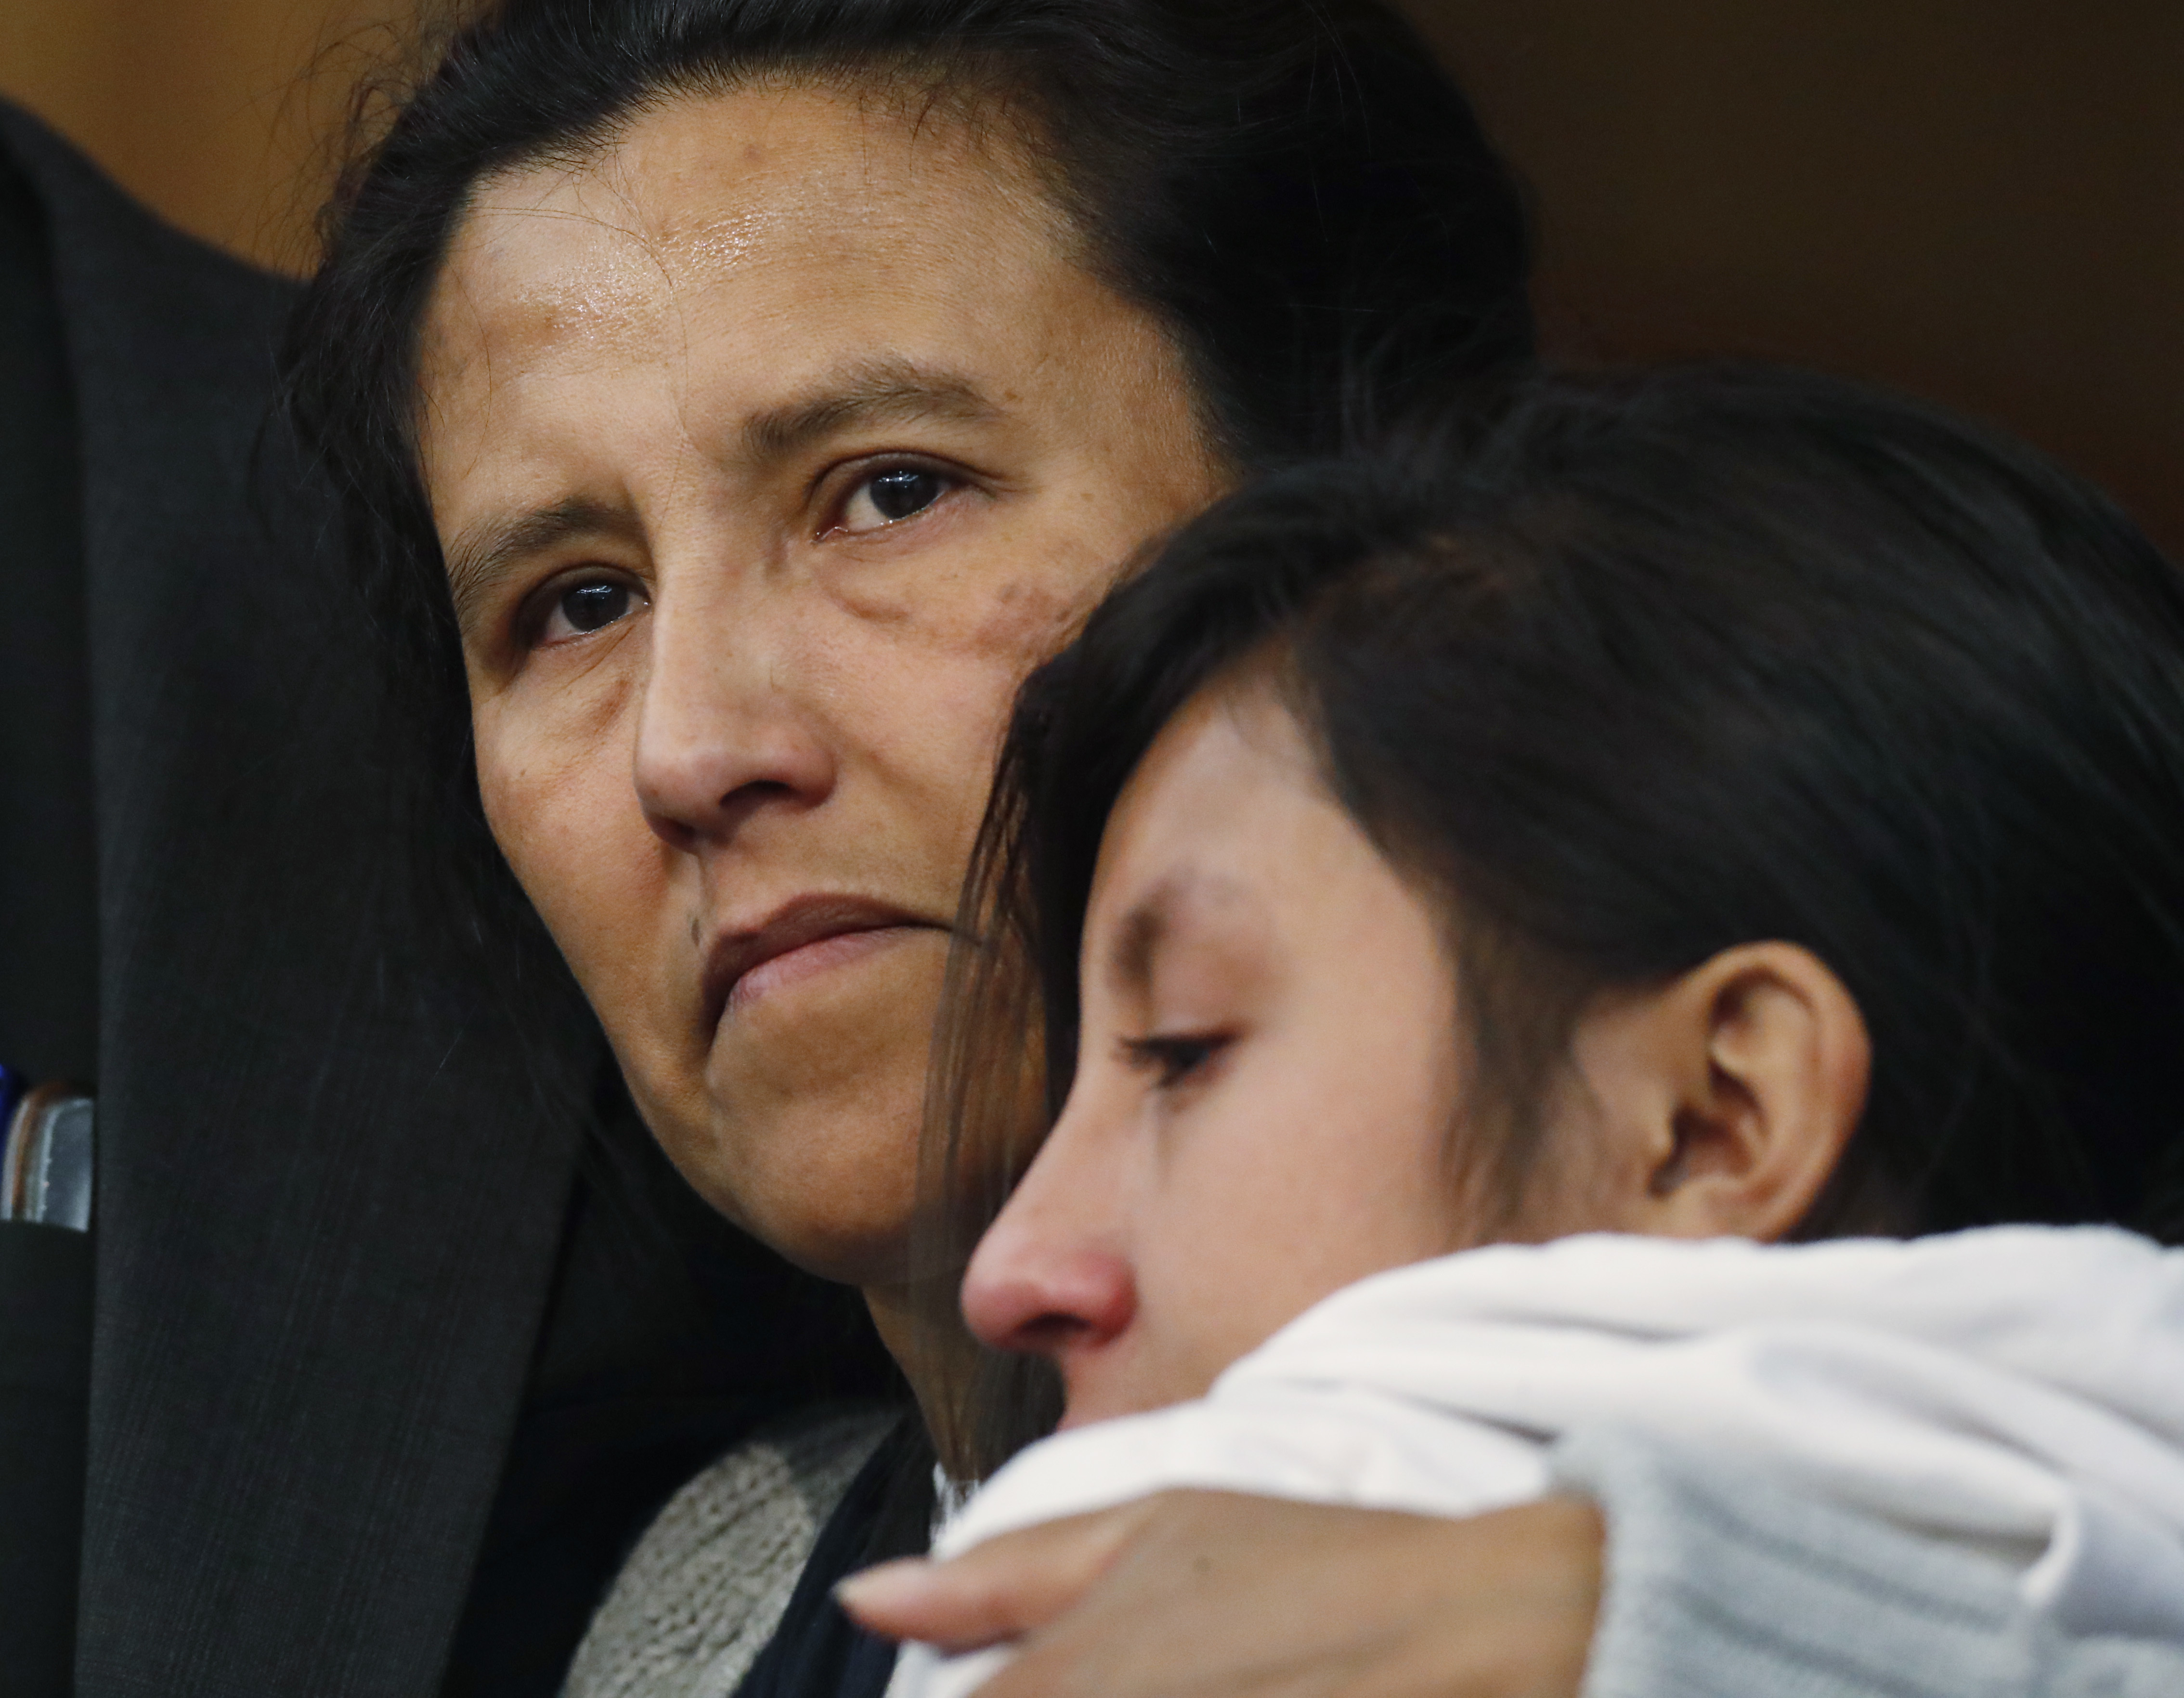 Jeanette Vizguerra, a Mexican woman seeking to avoid deportation from the United States, hugs her 12-year-old daughter, Luna, during a news conference in a church in which the she and her children have taken refuge Wednesday, Feb. 15, 2017, in Denver. U.S. immigration authorities have denied her request to remain in the country. (AP Photo/David Zalubowski)